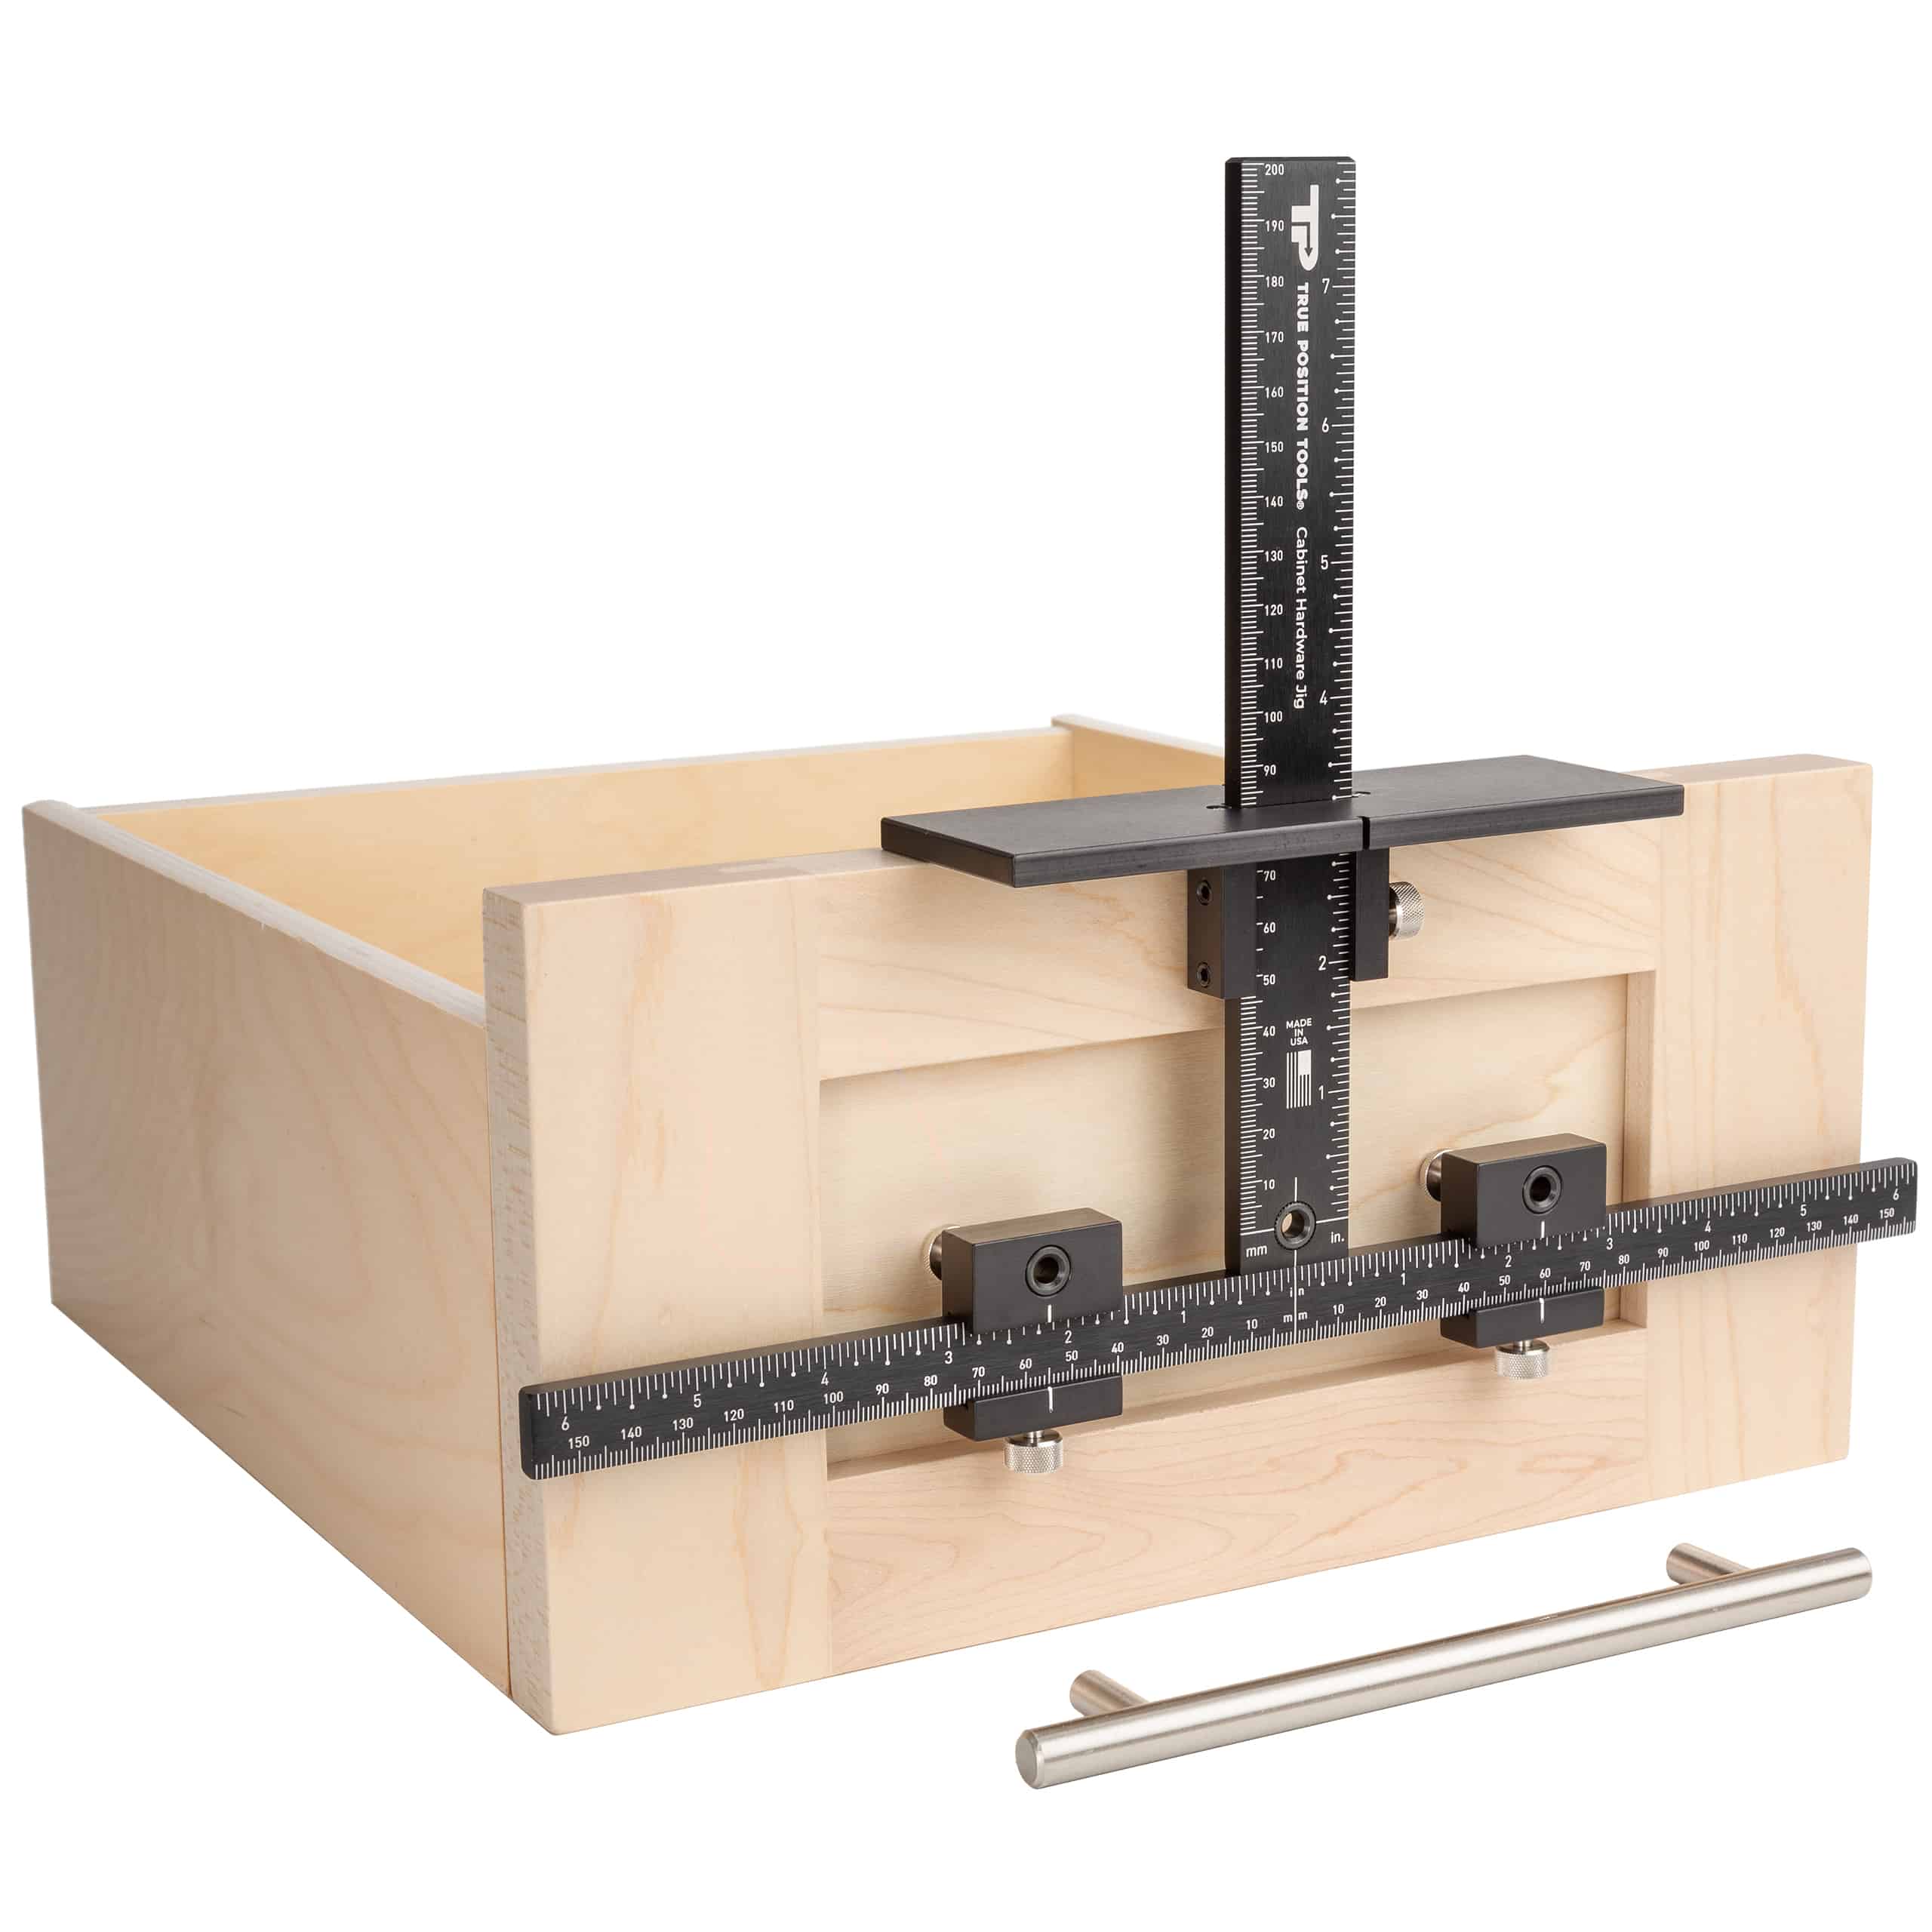 Hardware Jig ORIGINAL 1 Selling, 1 Rated. Made in USA